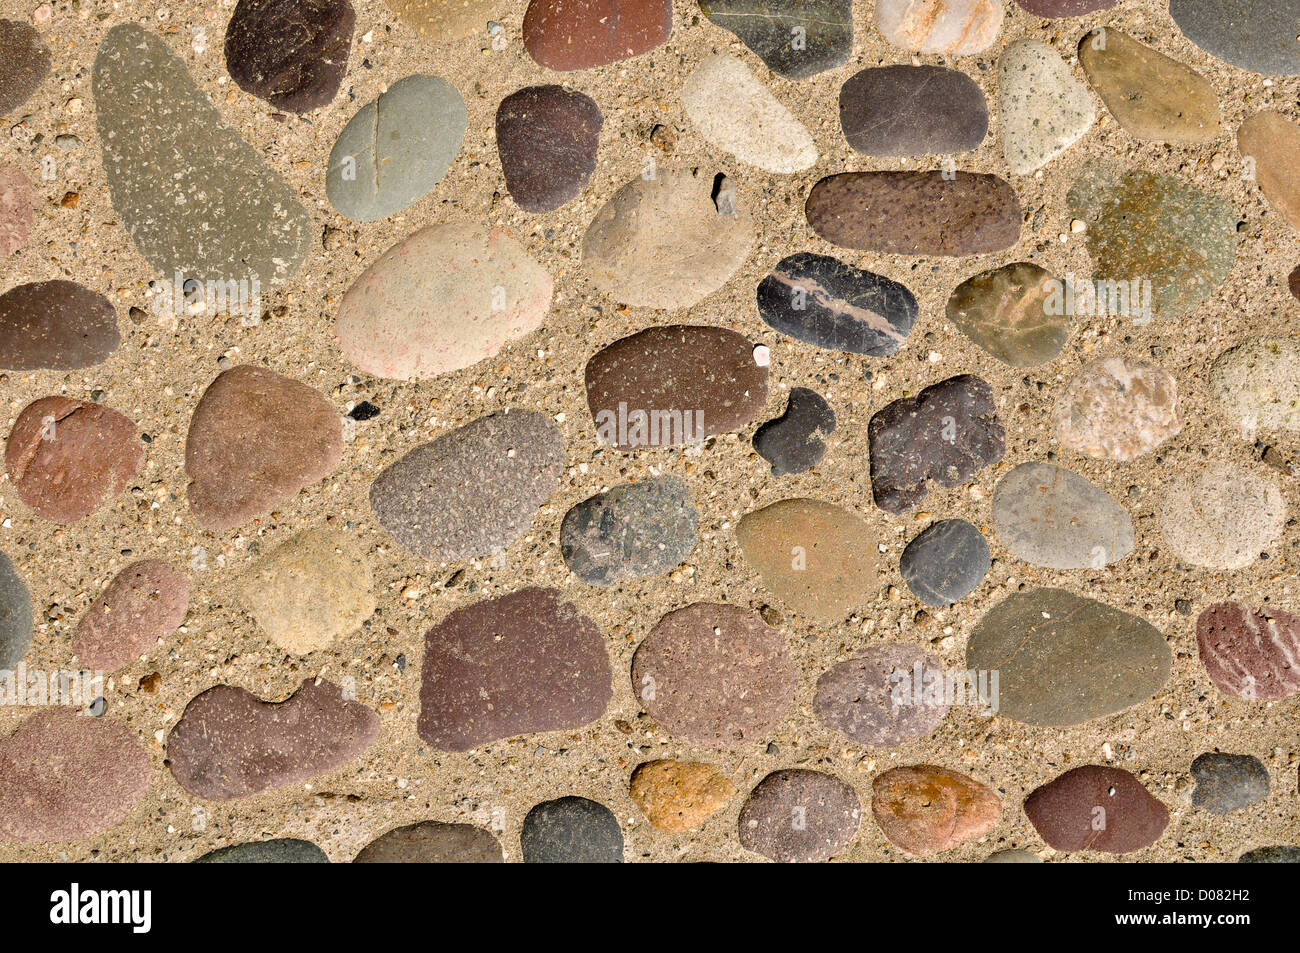 Colorful Rocks and Stones in Sand Background Stock Photo